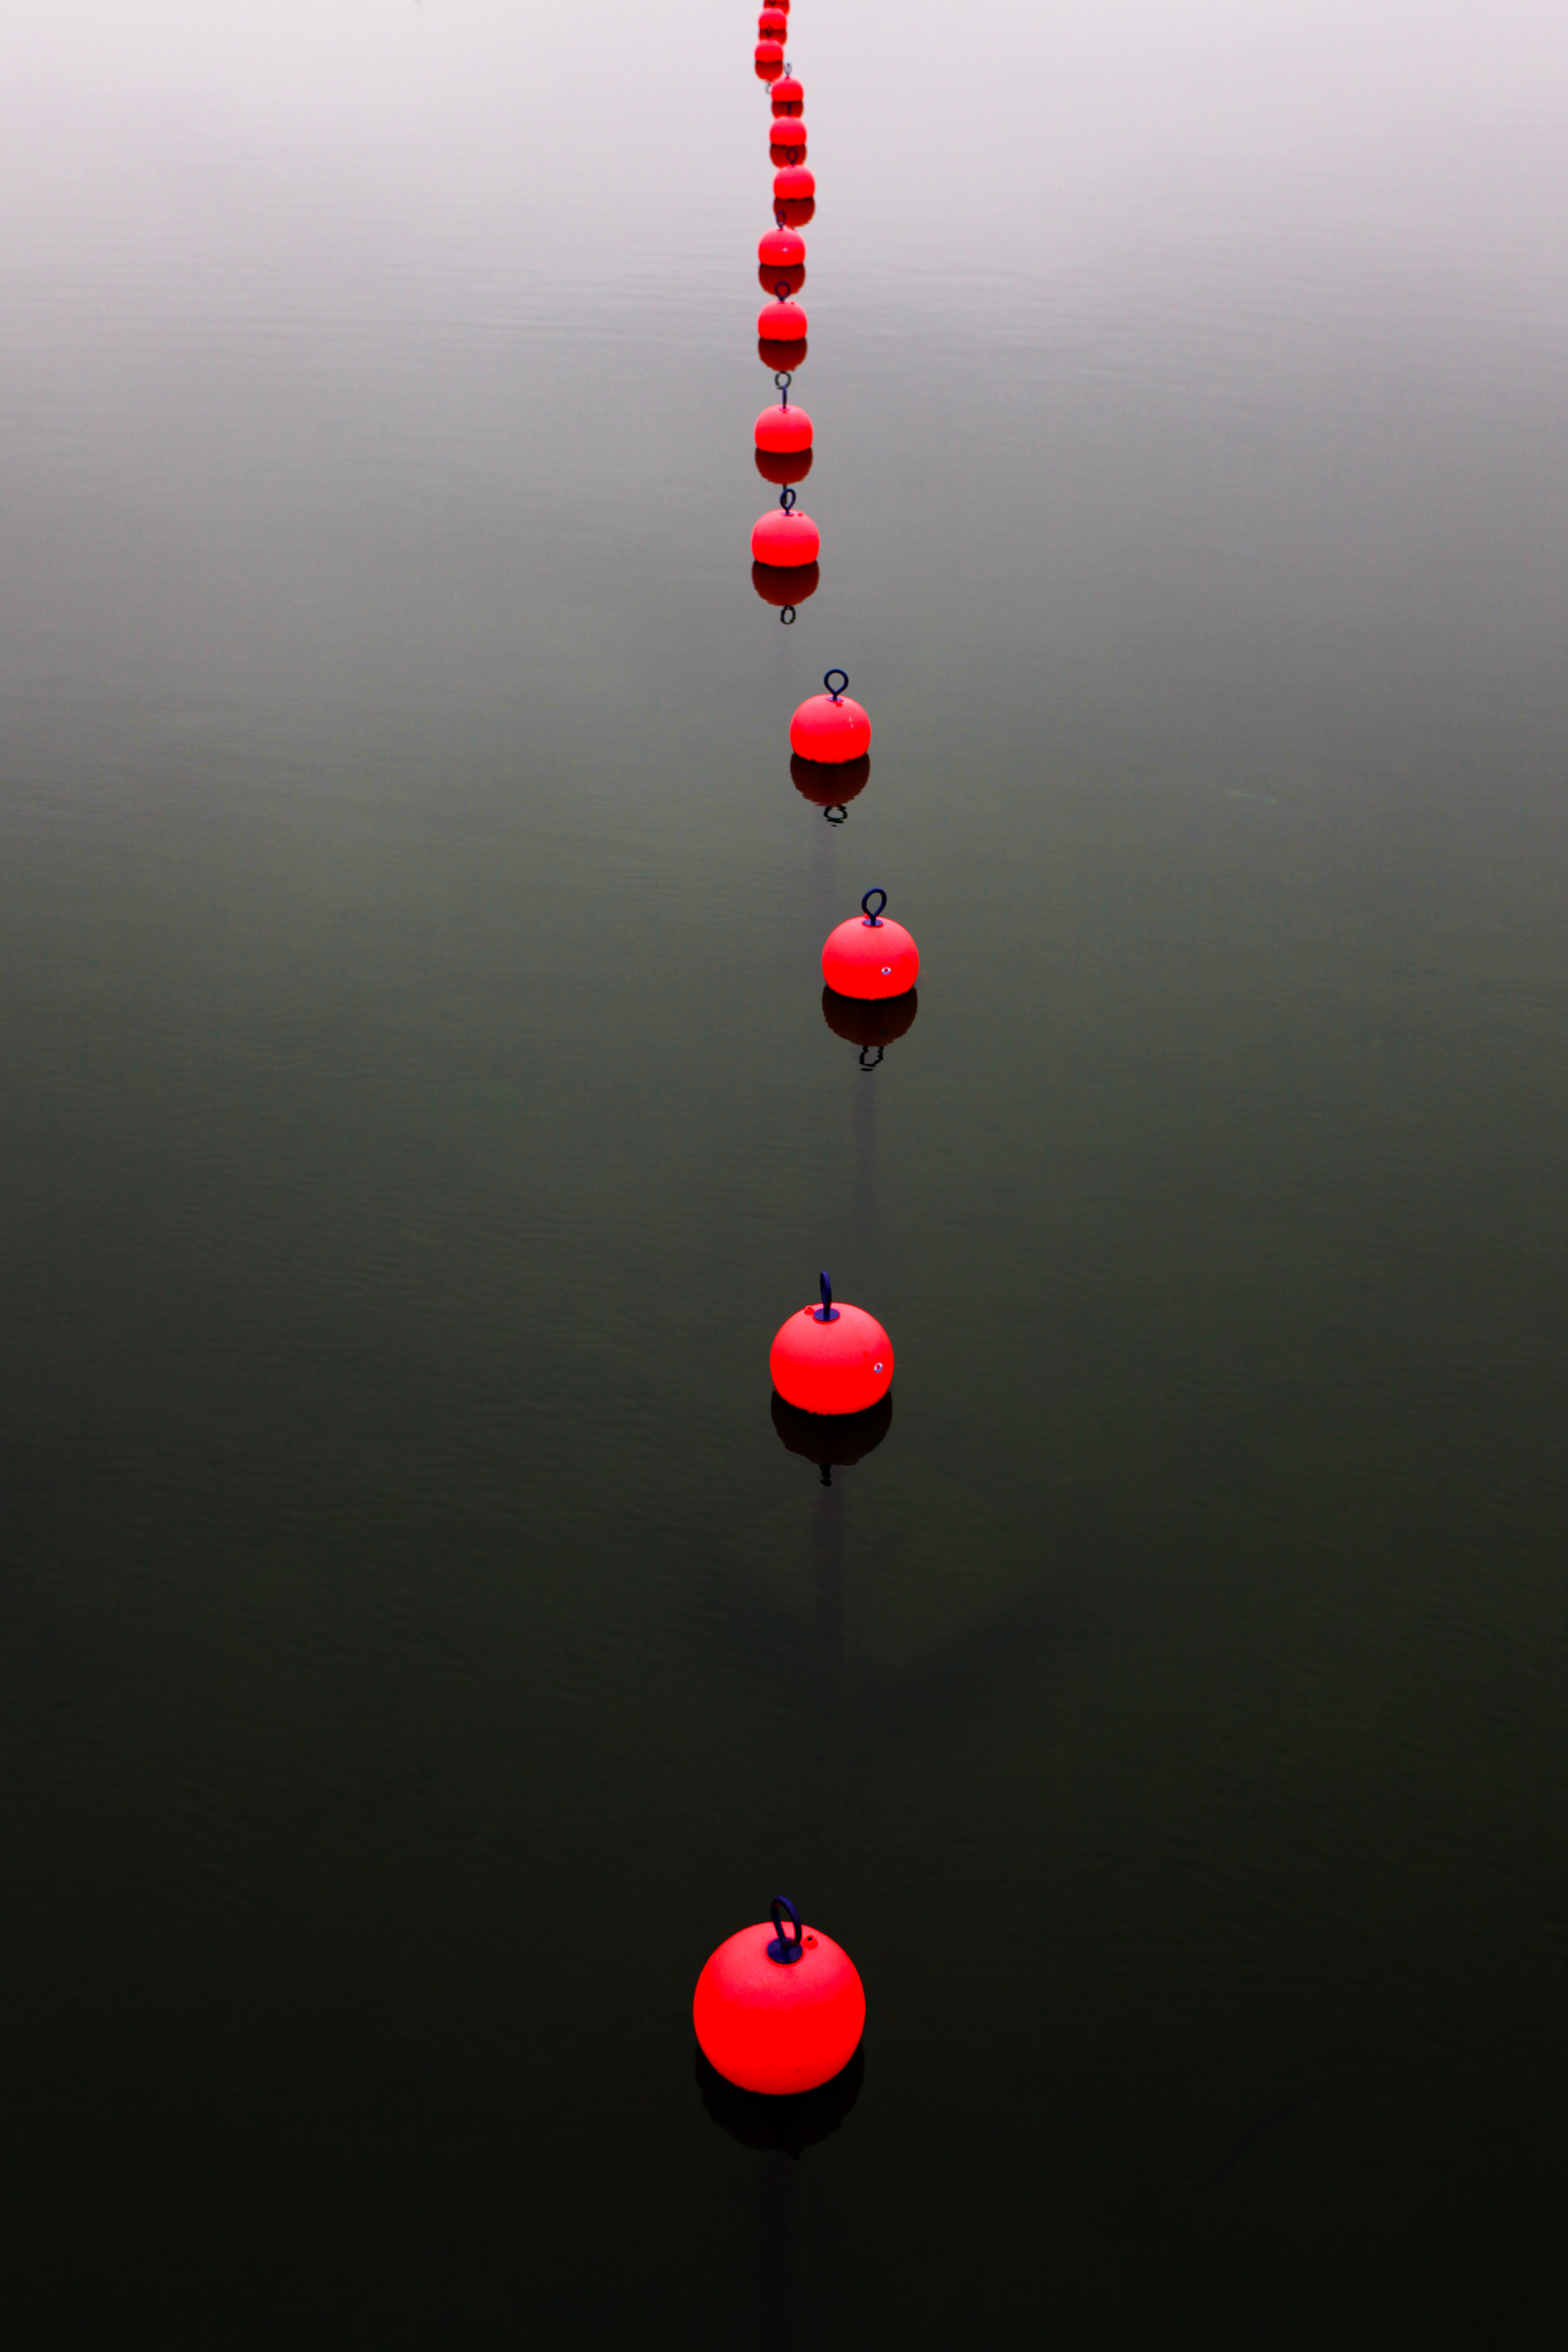 133880 download wallpaper sea, minimalism, buoy, limitation, restriction screensavers and pictures for free